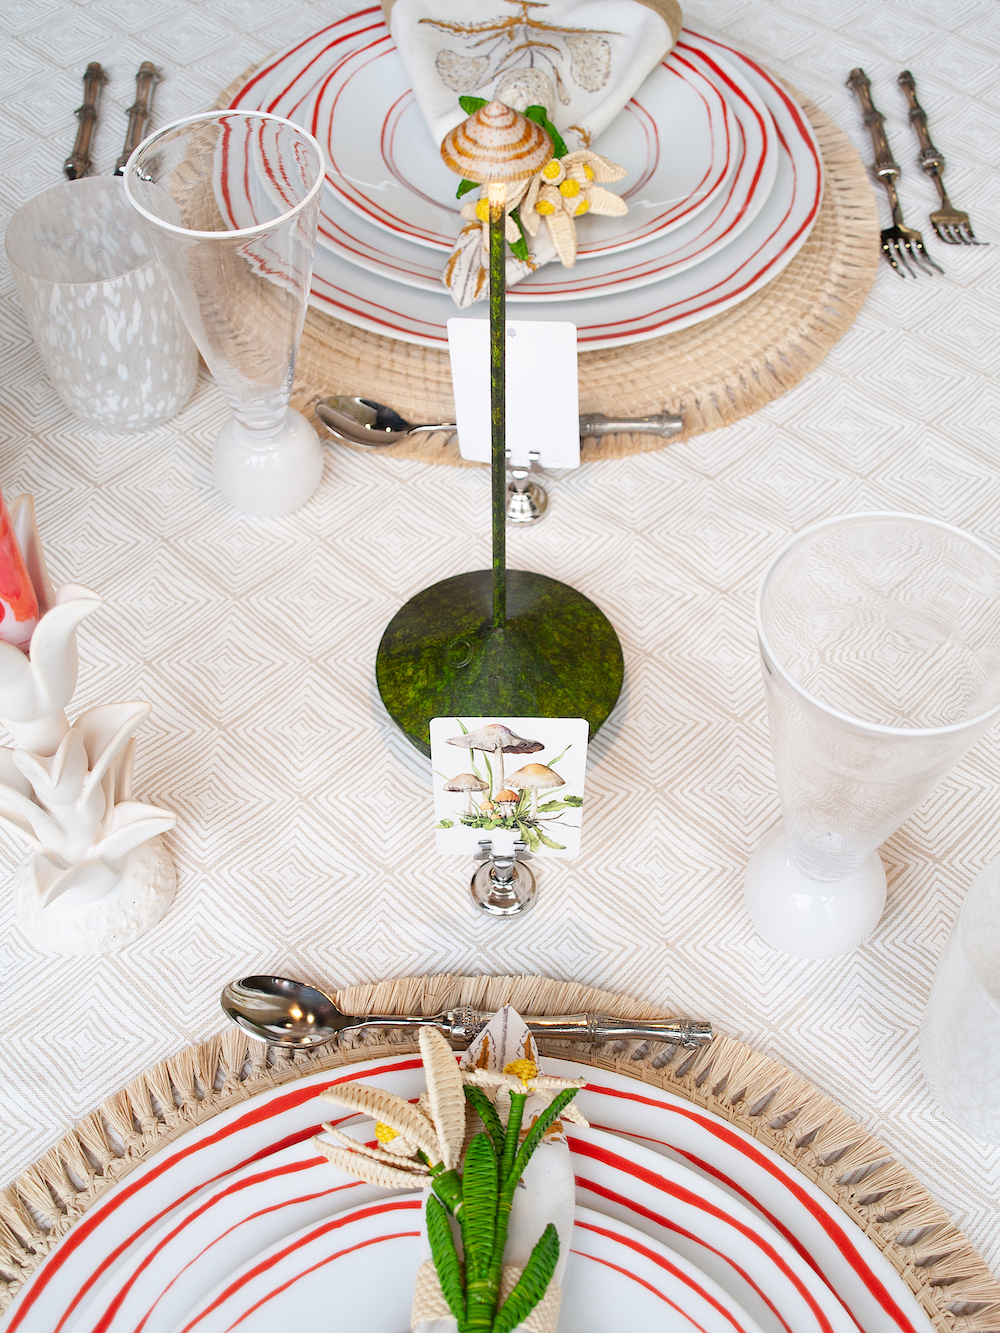 Alessandra Branca table for National Place Card Day